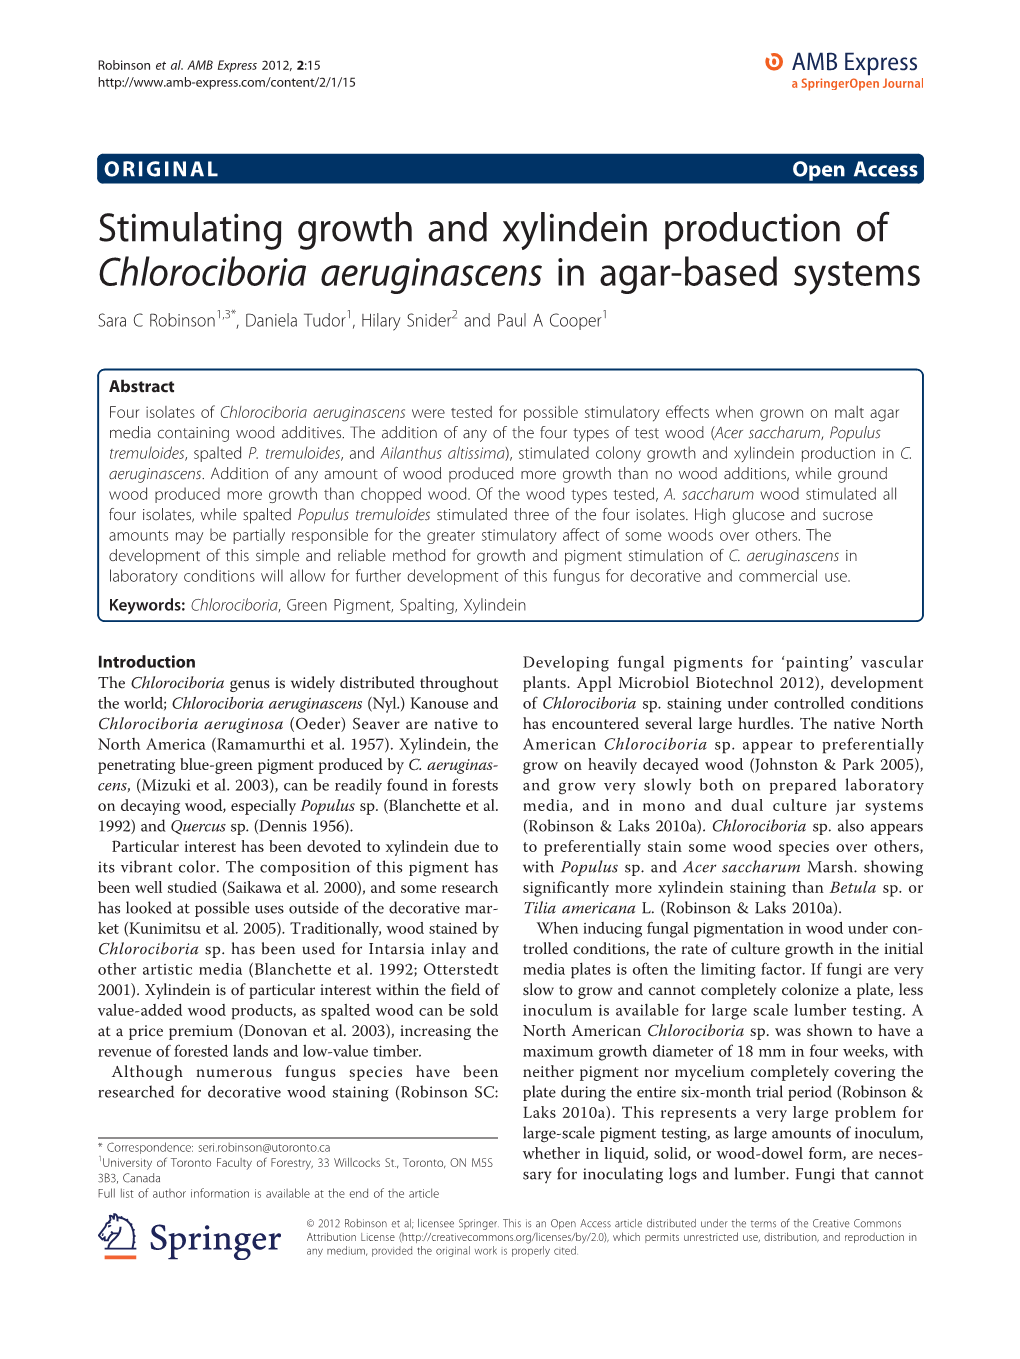 Stimulating Growth and Xylindein Production Of